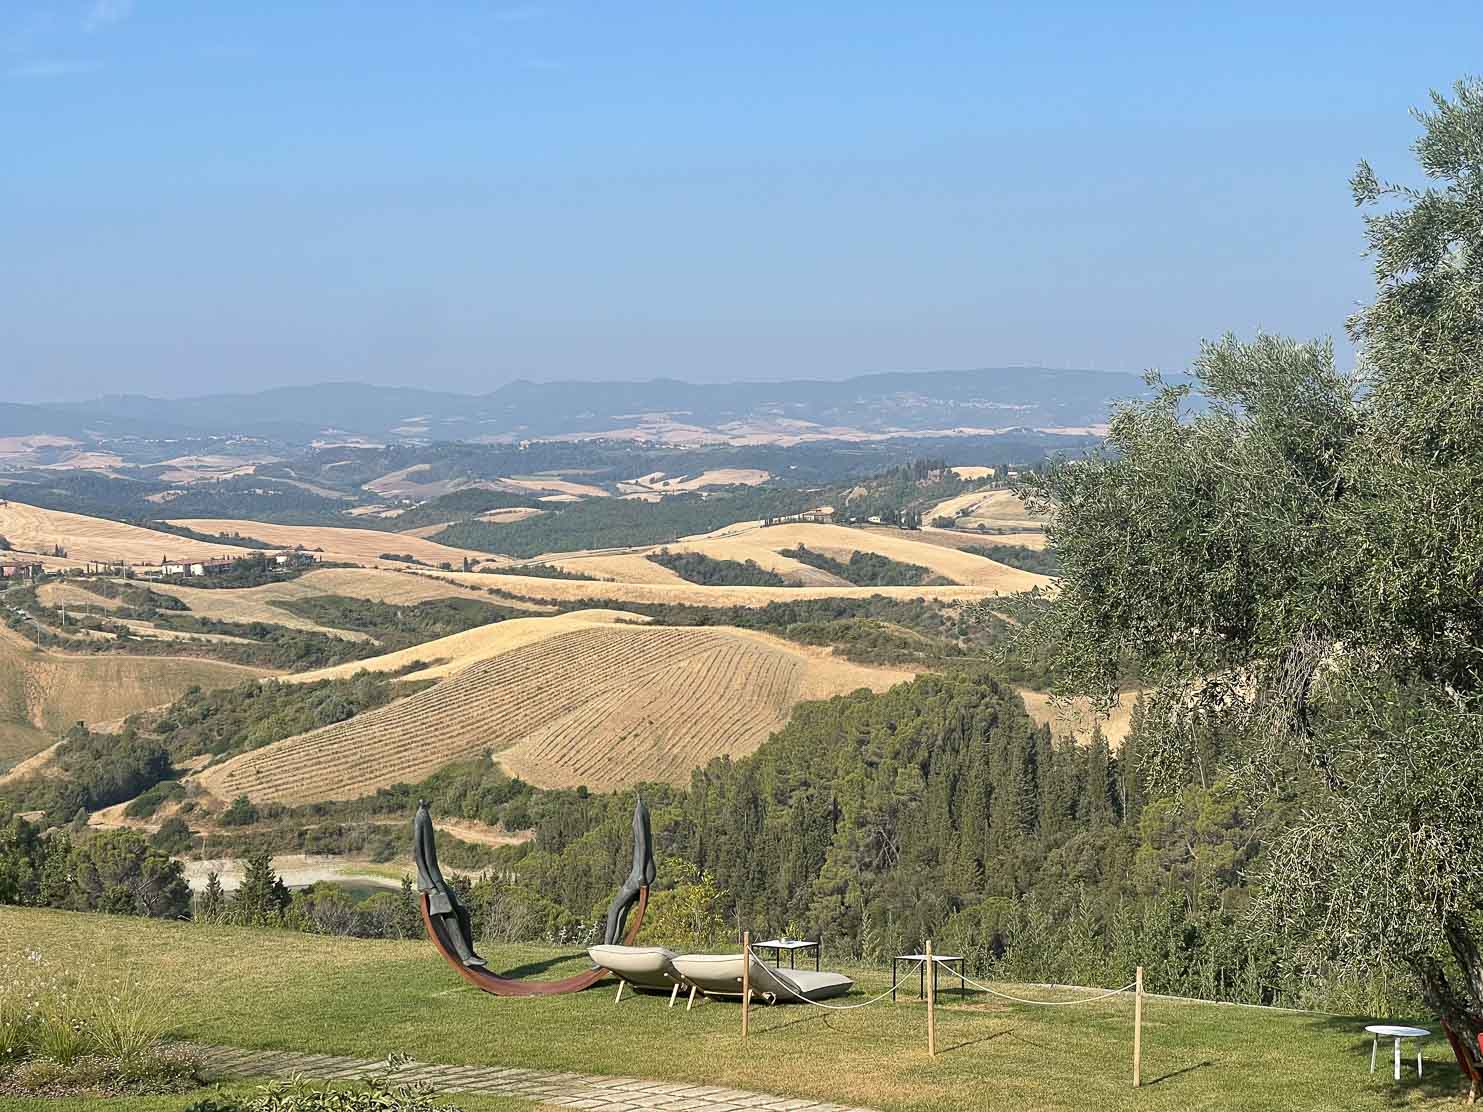 Castelfalfi The postcard Tuscan view of rolling hills and stunning vistas. This was our breakfast view